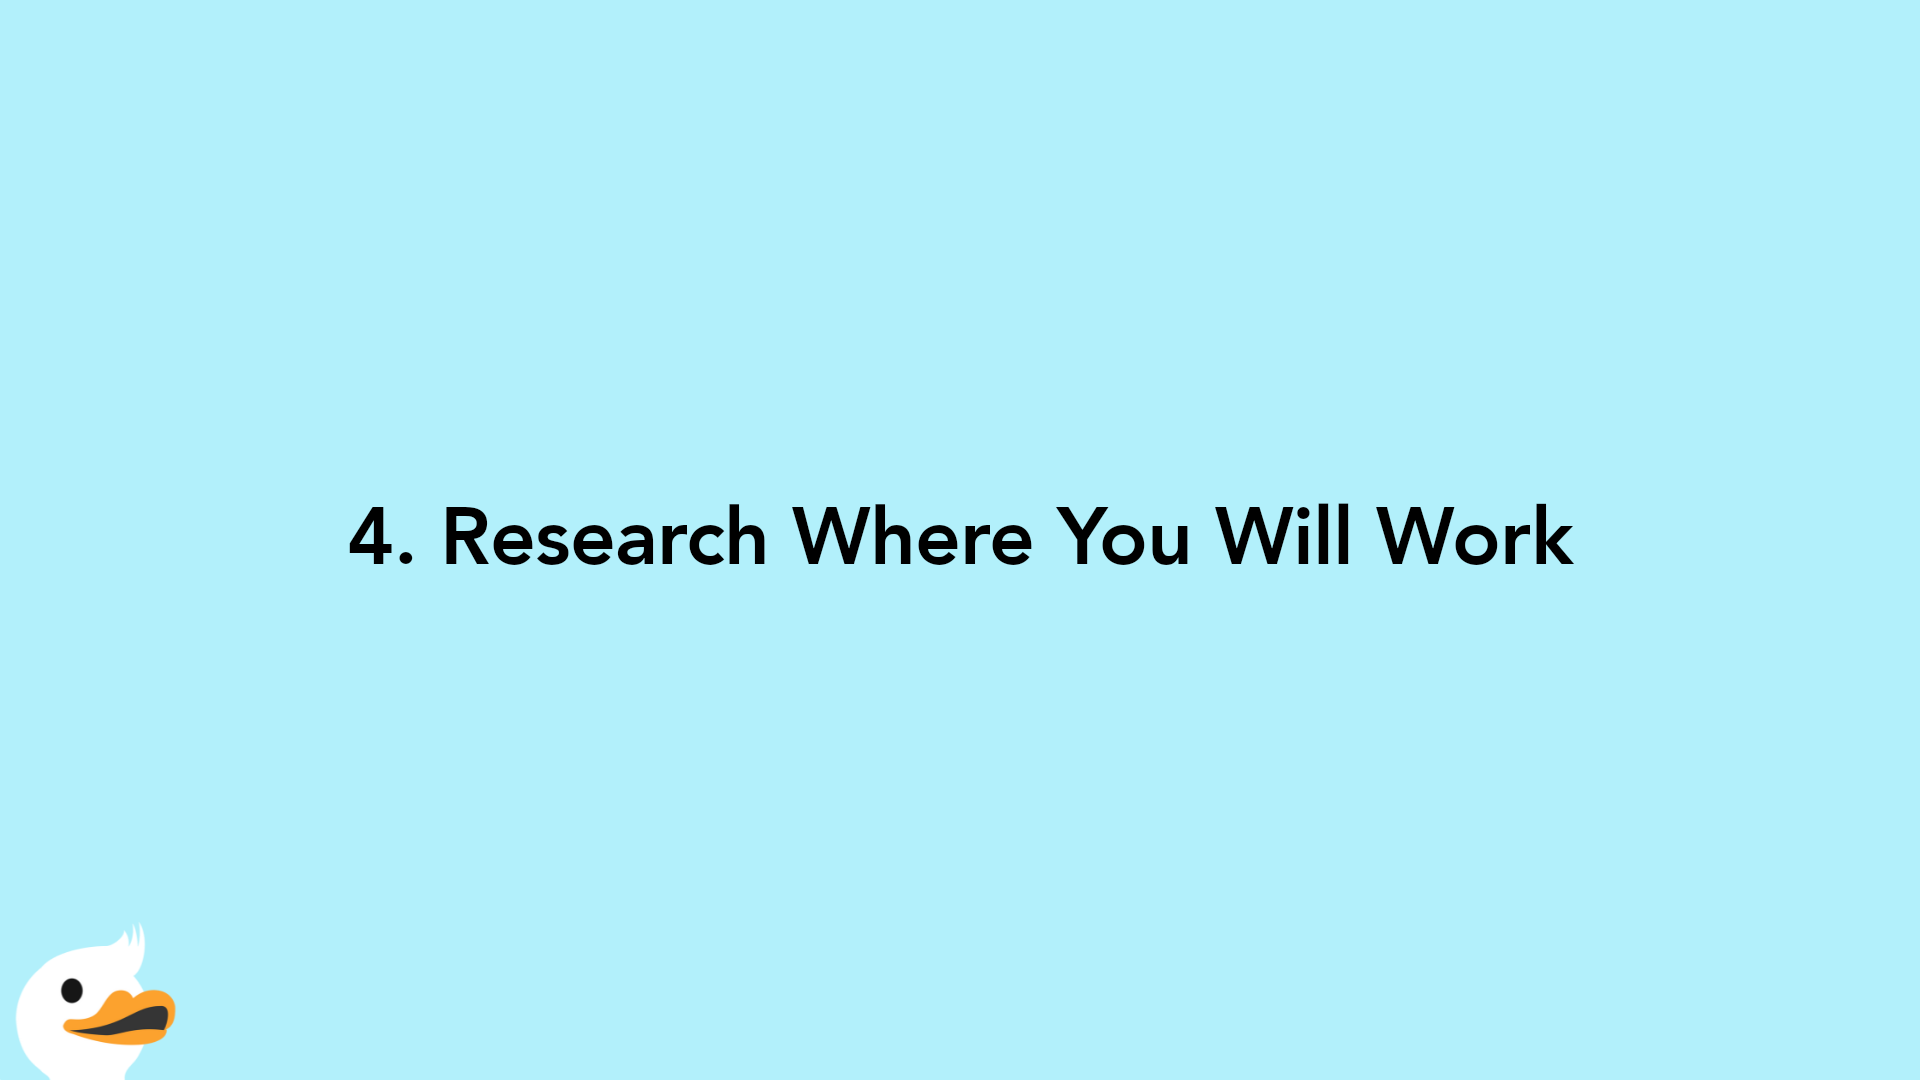 4. Research Where You Will Work